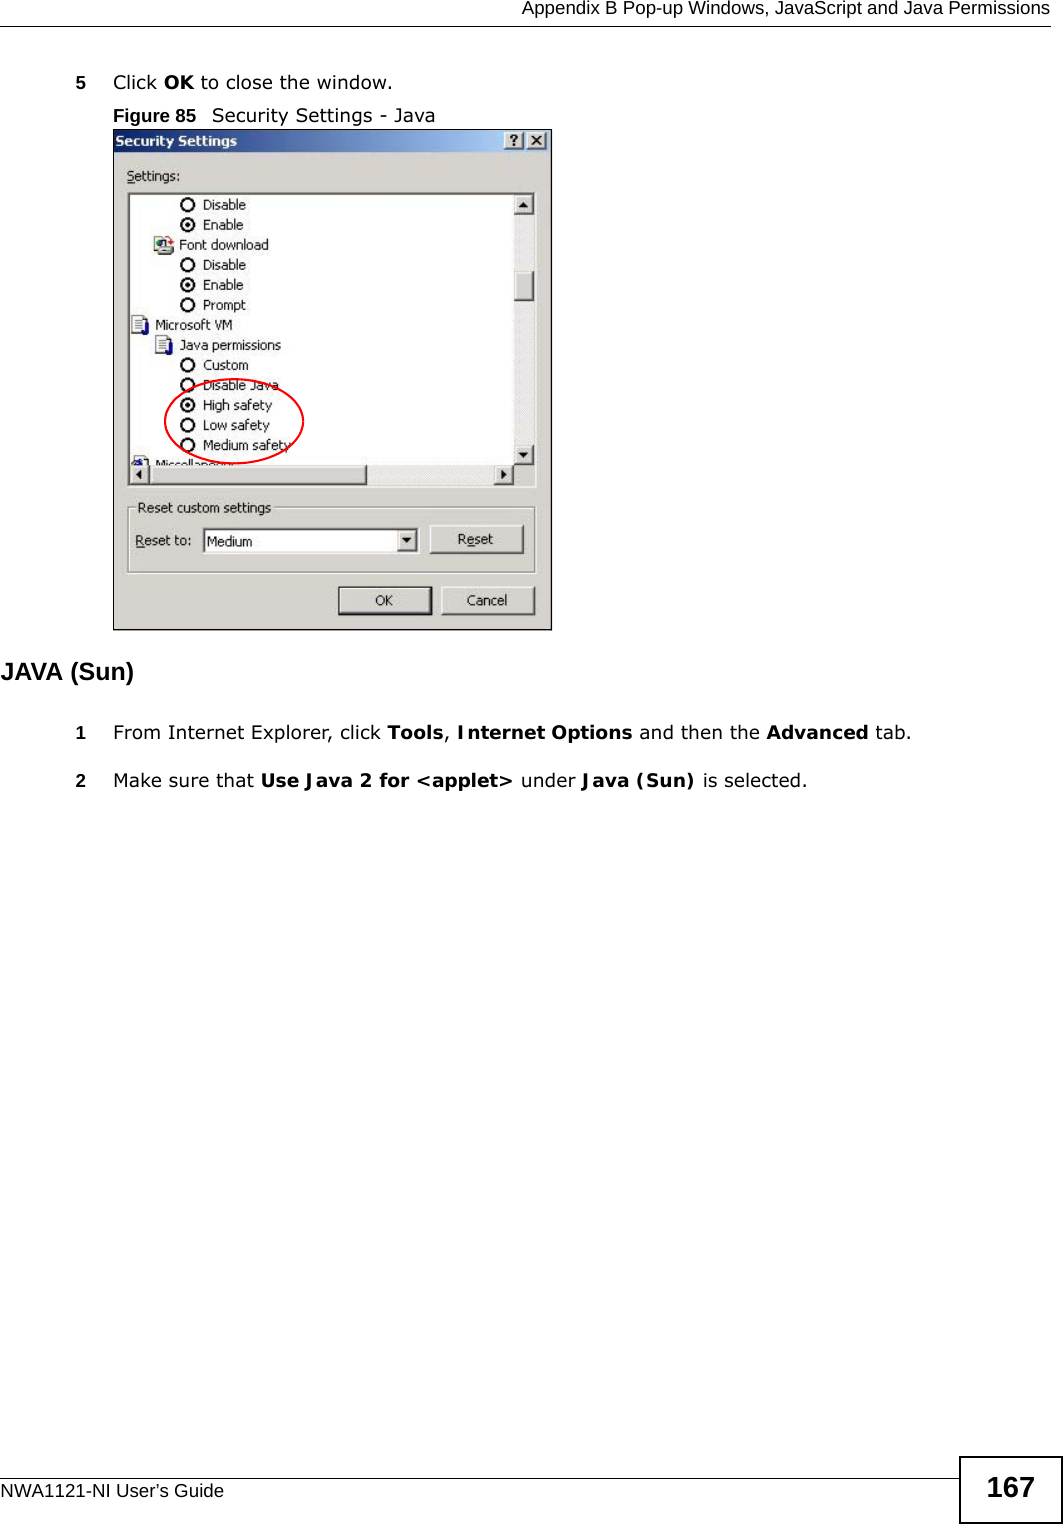  Appendix B Pop-up Windows, JavaScript and Java PermissionsNWA1121-NI User’s Guide 1675Click OK to close the window.Figure 85   Security Settings - Java JAVA (Sun)1From Internet Explorer, click Tools, Internet Options and then the Advanced tab. 2Make sure that Use Java 2 for &lt;applet&gt; under Java (Sun) is selected.